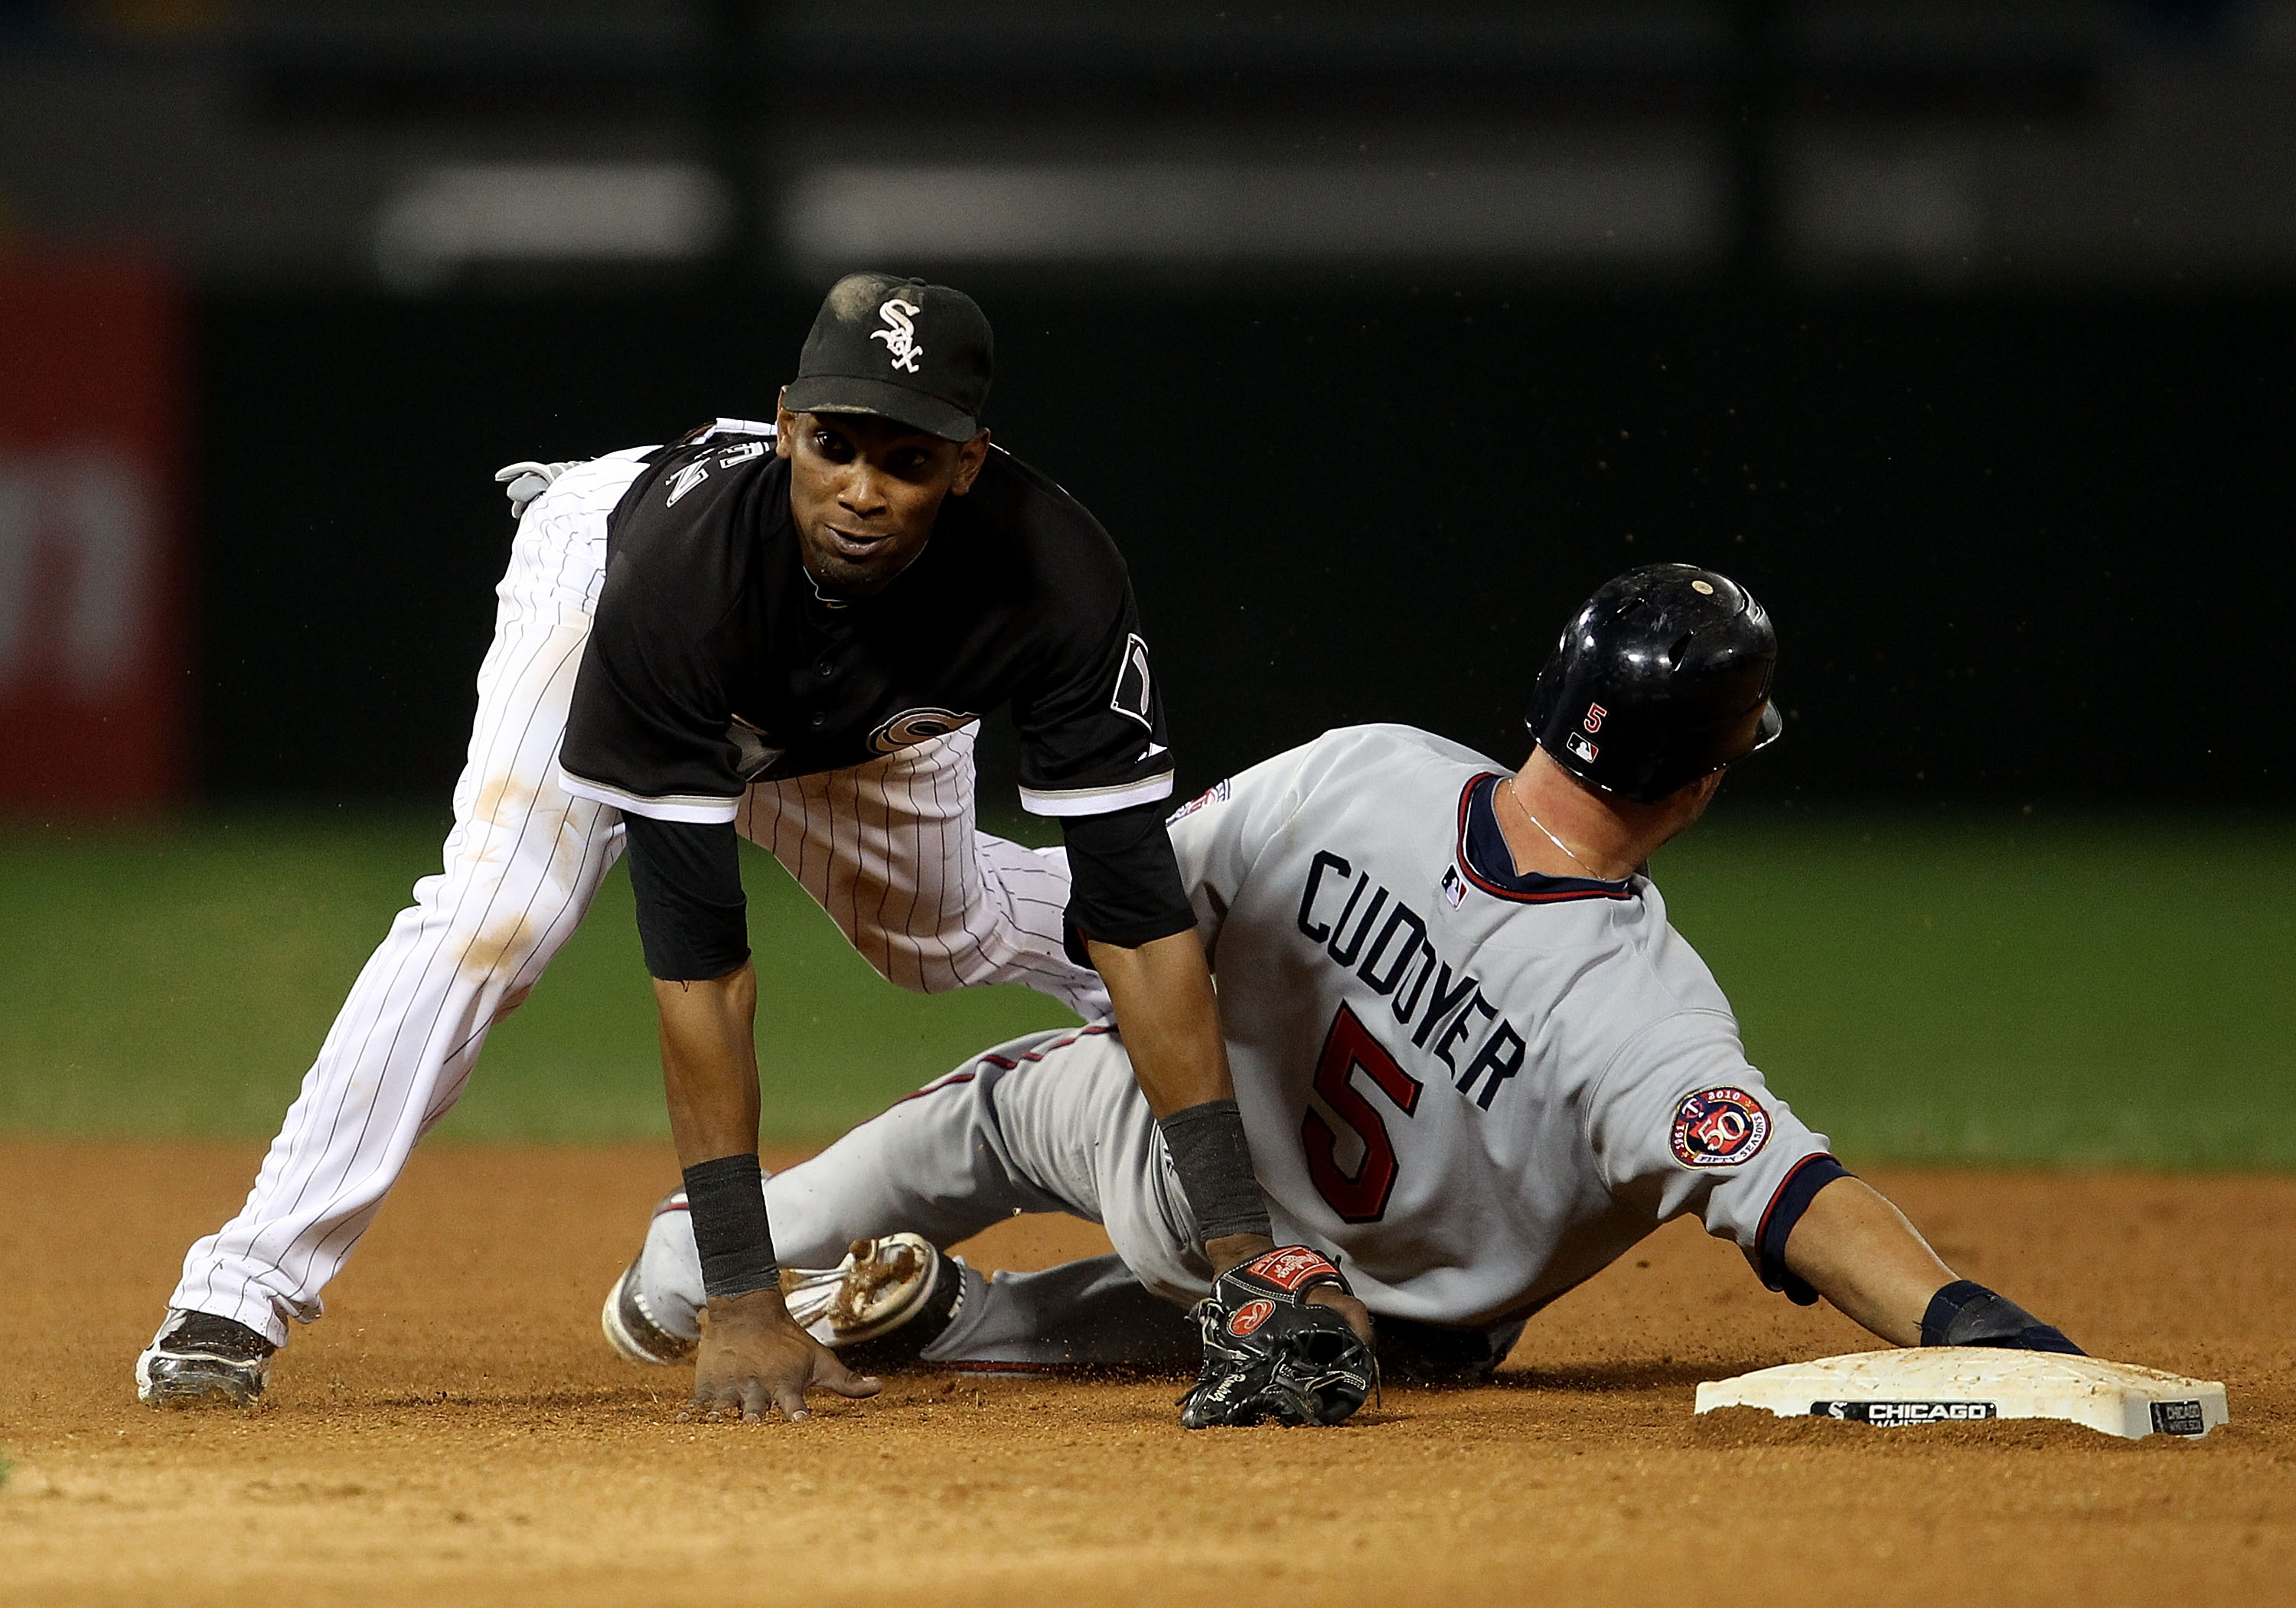 CHICAGO - SEPTEMBER 14: Alexei Ramirez #10 of the Chicago White Sox falls over Michael Cuddyer #5 of the Minnesota Twins after turning a double play at U.S. Cellular Field on September 14, 2010 in Chicago, Illinois. (Photo by Jonathan Daniel/Getty Images)